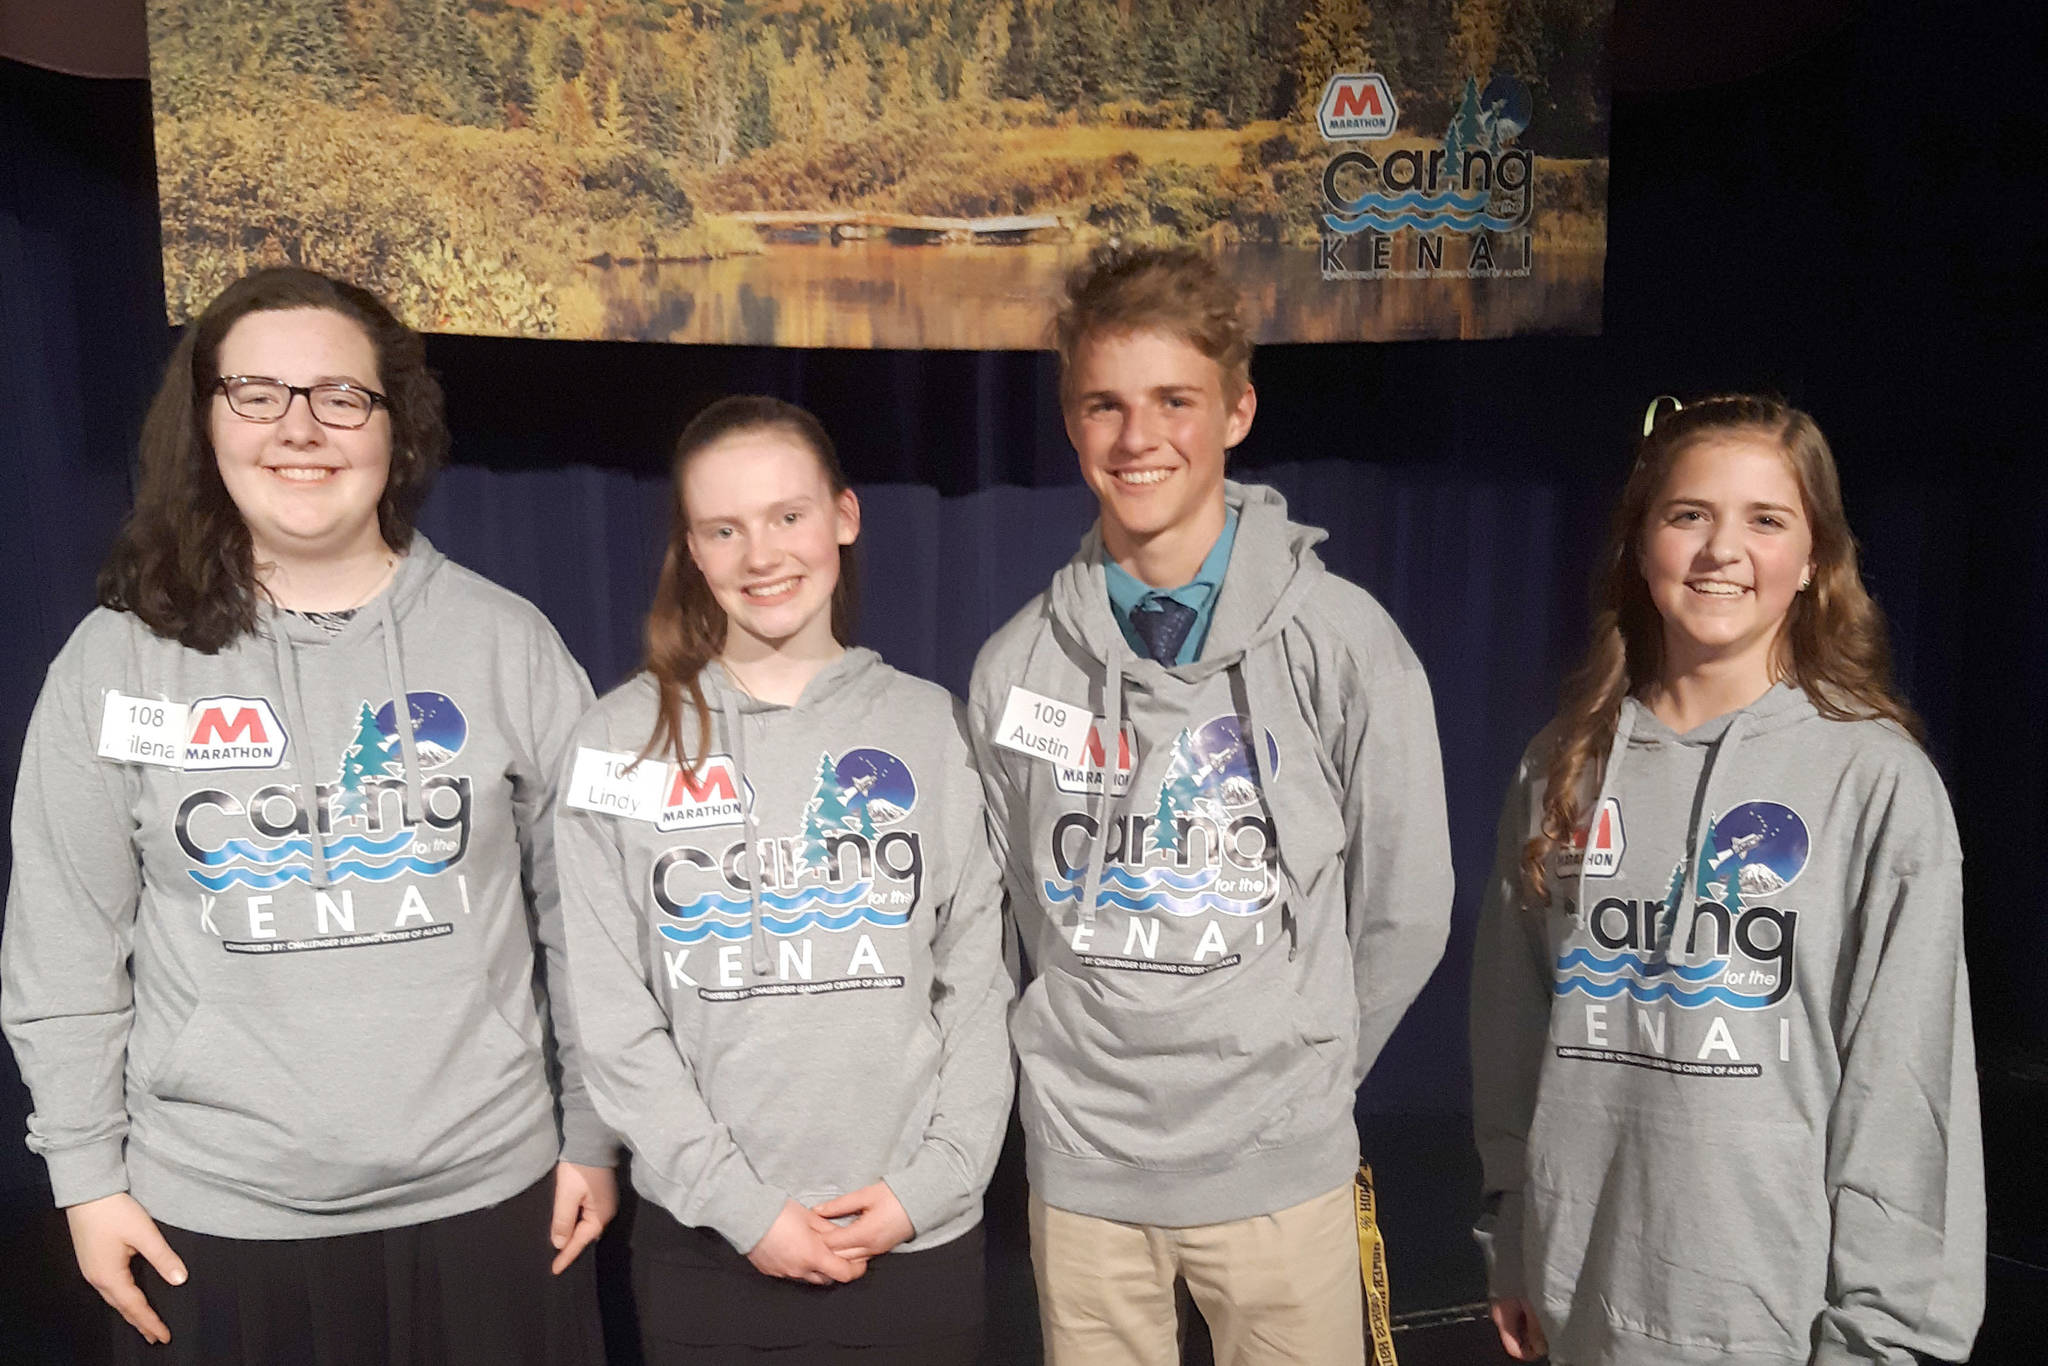 From left, the Caring for the Kenai finalists Akilena Veach and Lindy Guernsey (second place), Austin Cline (first place), and Anna DeVolld (third place) pose for a photo at Kenai Central High School in Alaska on Thursday, April 18, 2019. (Photo by Brian Mazurek/Peninsula Clarion)